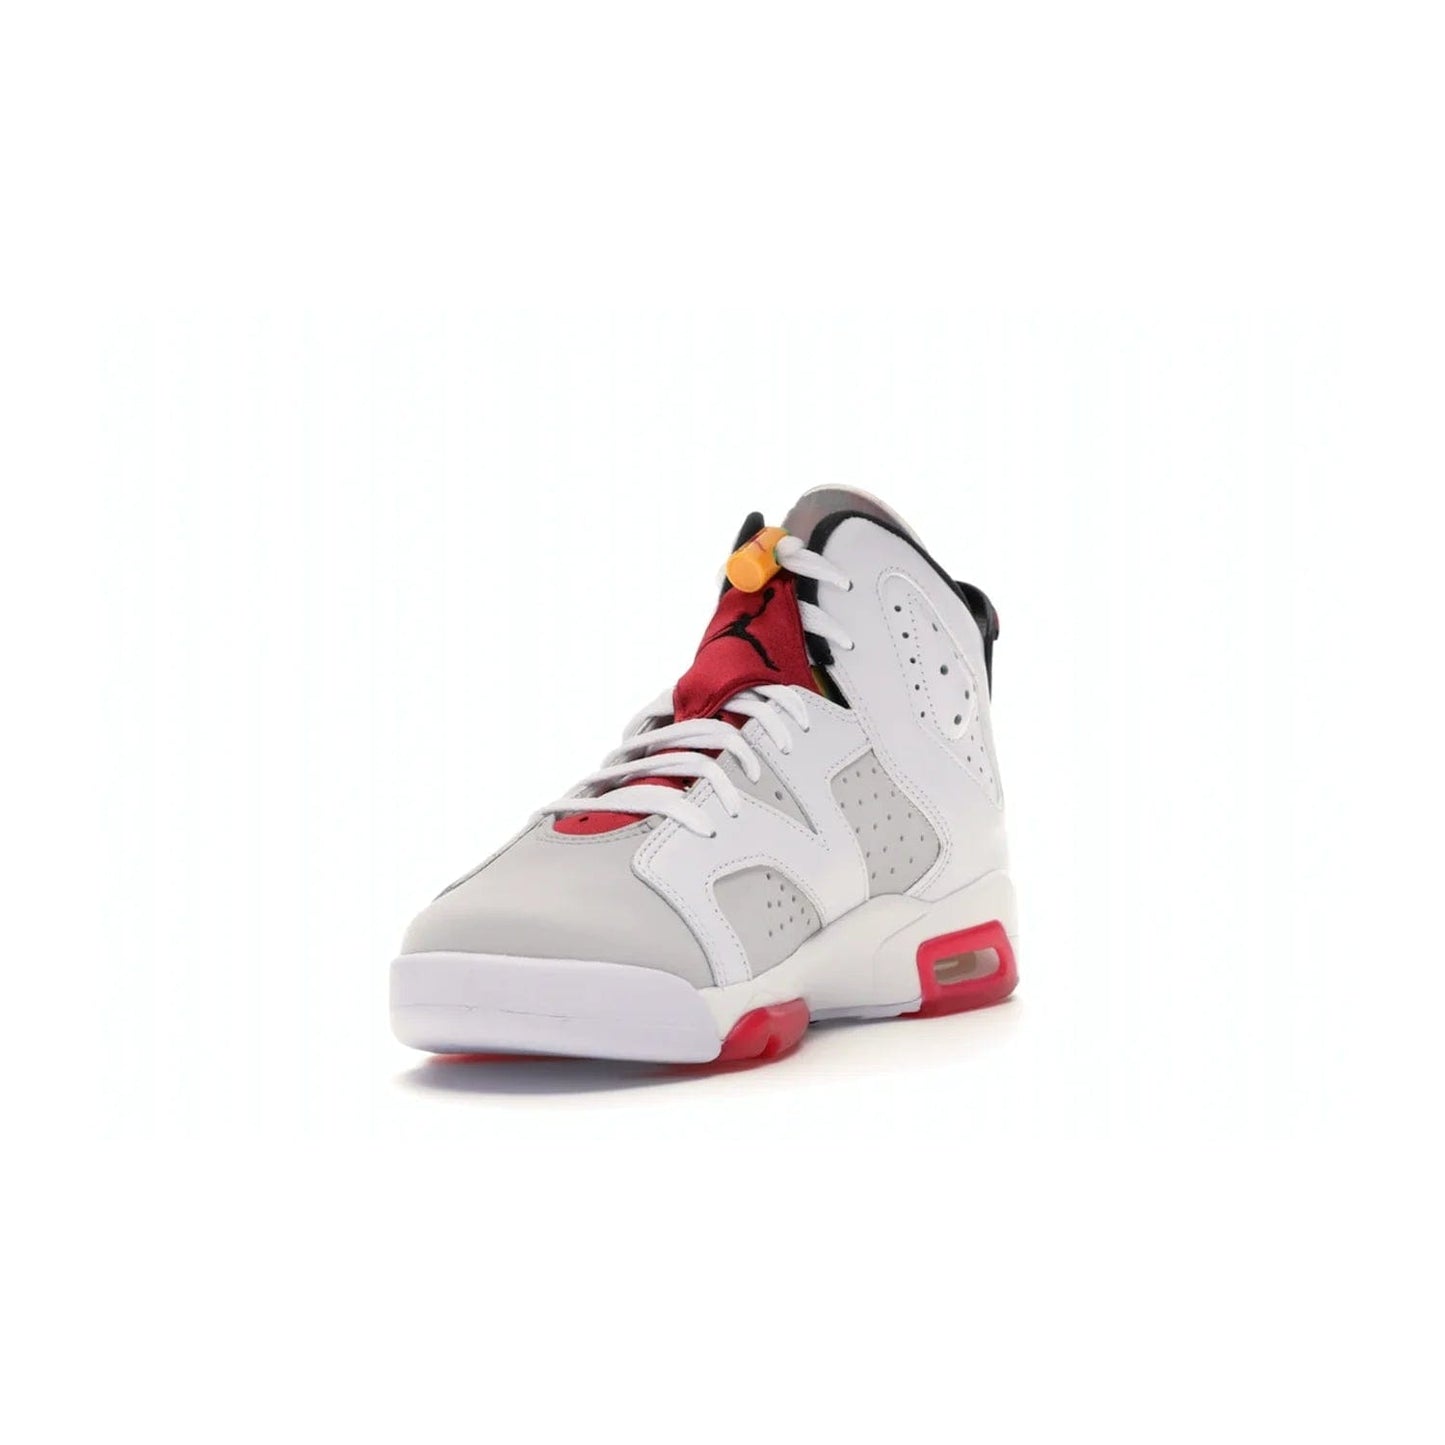 Jordan 6 Retro Hare (GS) - Image 13 - Only at www.BallersClubKickz.com - The Air Jordan 6 Hare GS. Comfortable suede upper, perforations, red pods, two-tone midsole, and signature "Jumpman" emblem. Released 17 June 2020. Perfect for any sneakerhead.